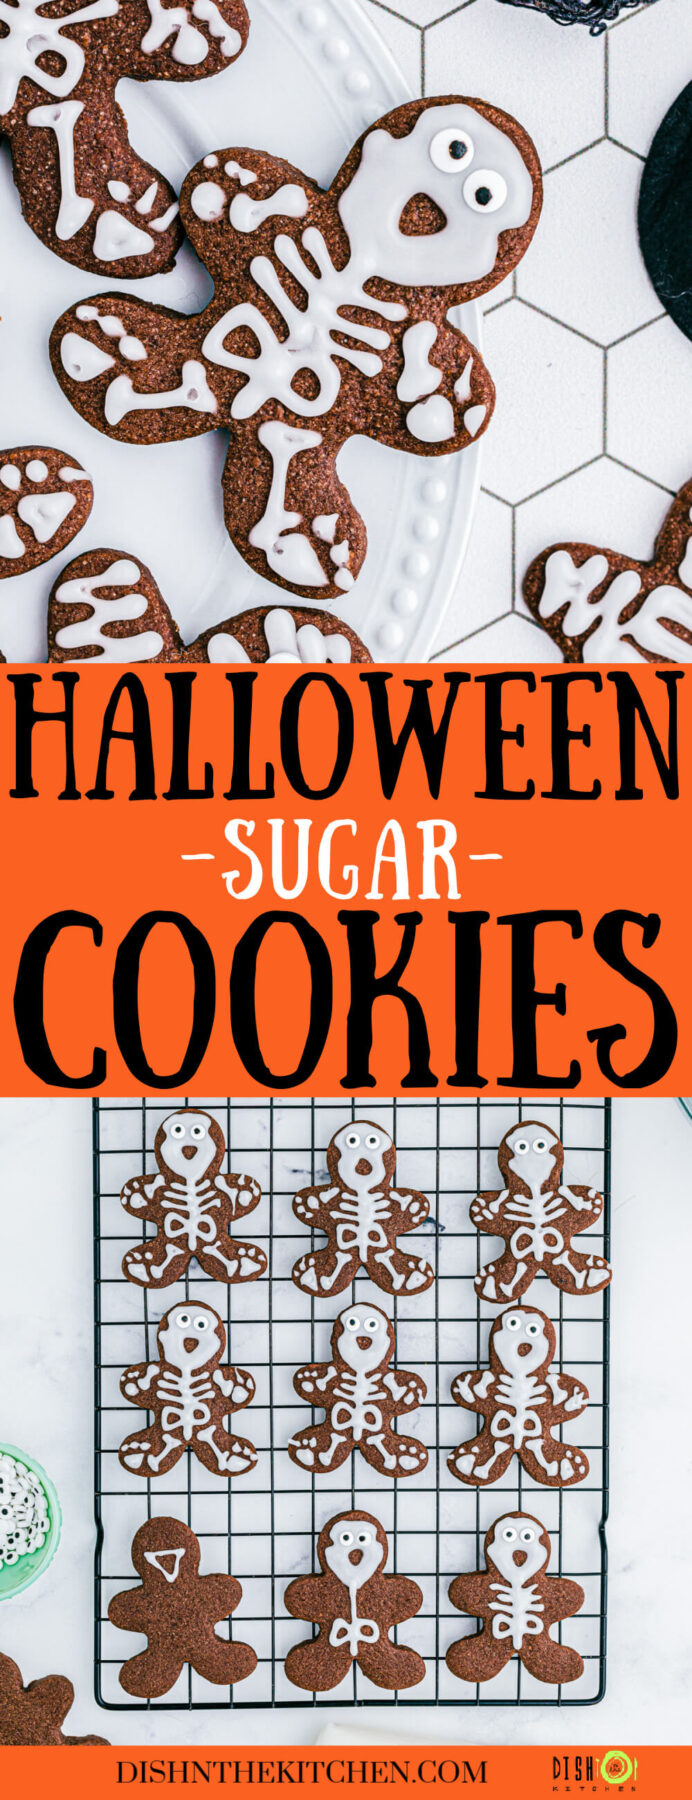 Pinterest image featuring chocolate Halloween Sugar Cookies decorated as mummies and skeletons.